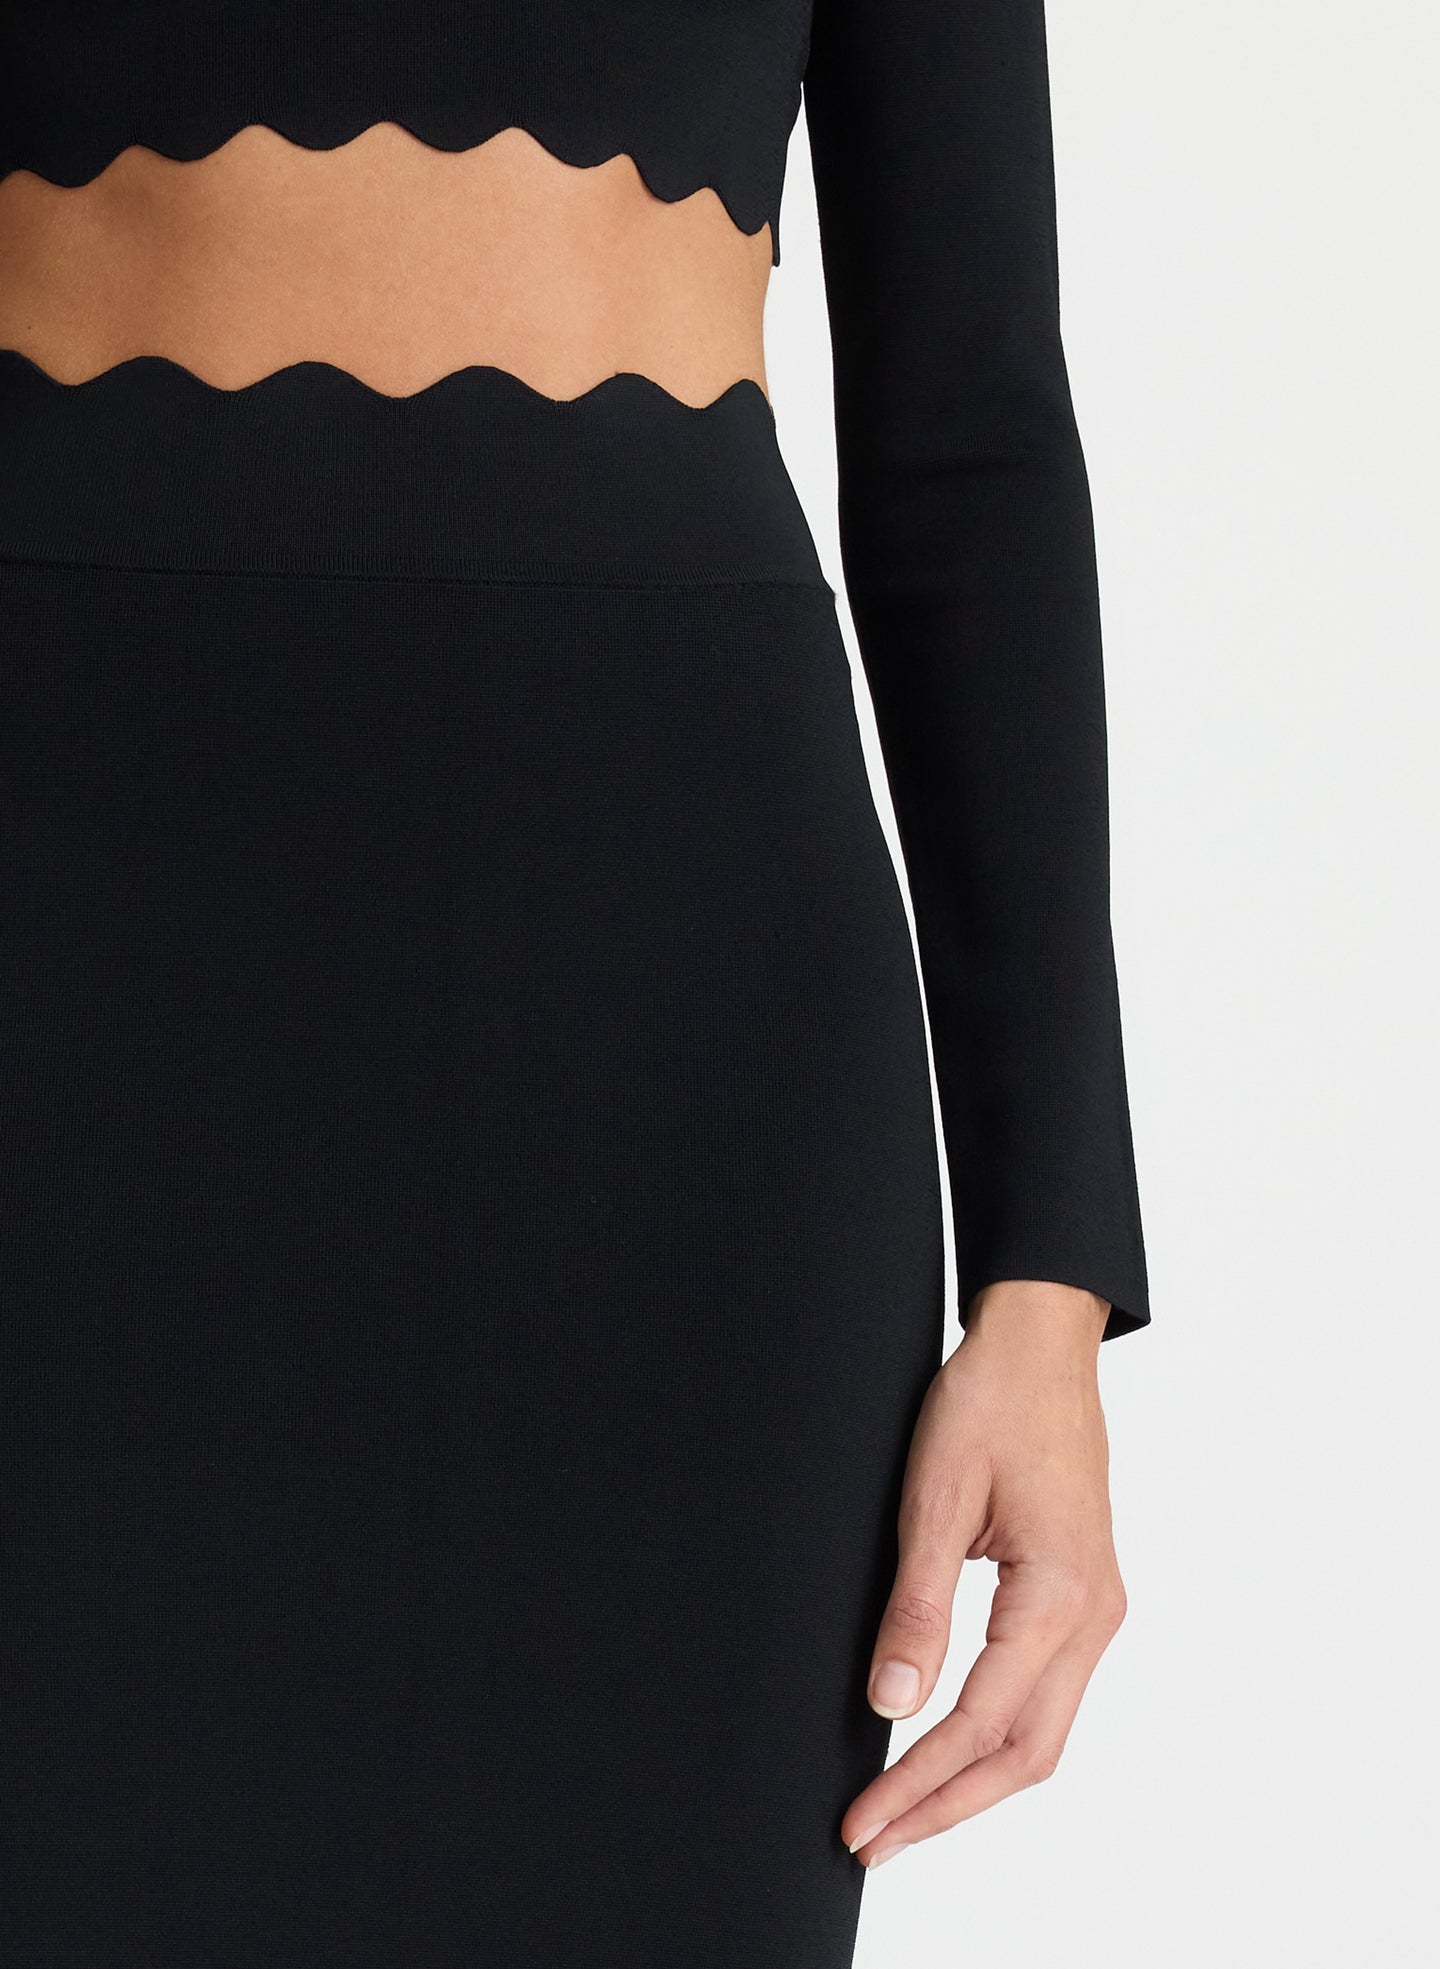 detail view of woman wearing black long sleeve crop top with scallop detailing and matching black scalloped detailing knit midi skirt